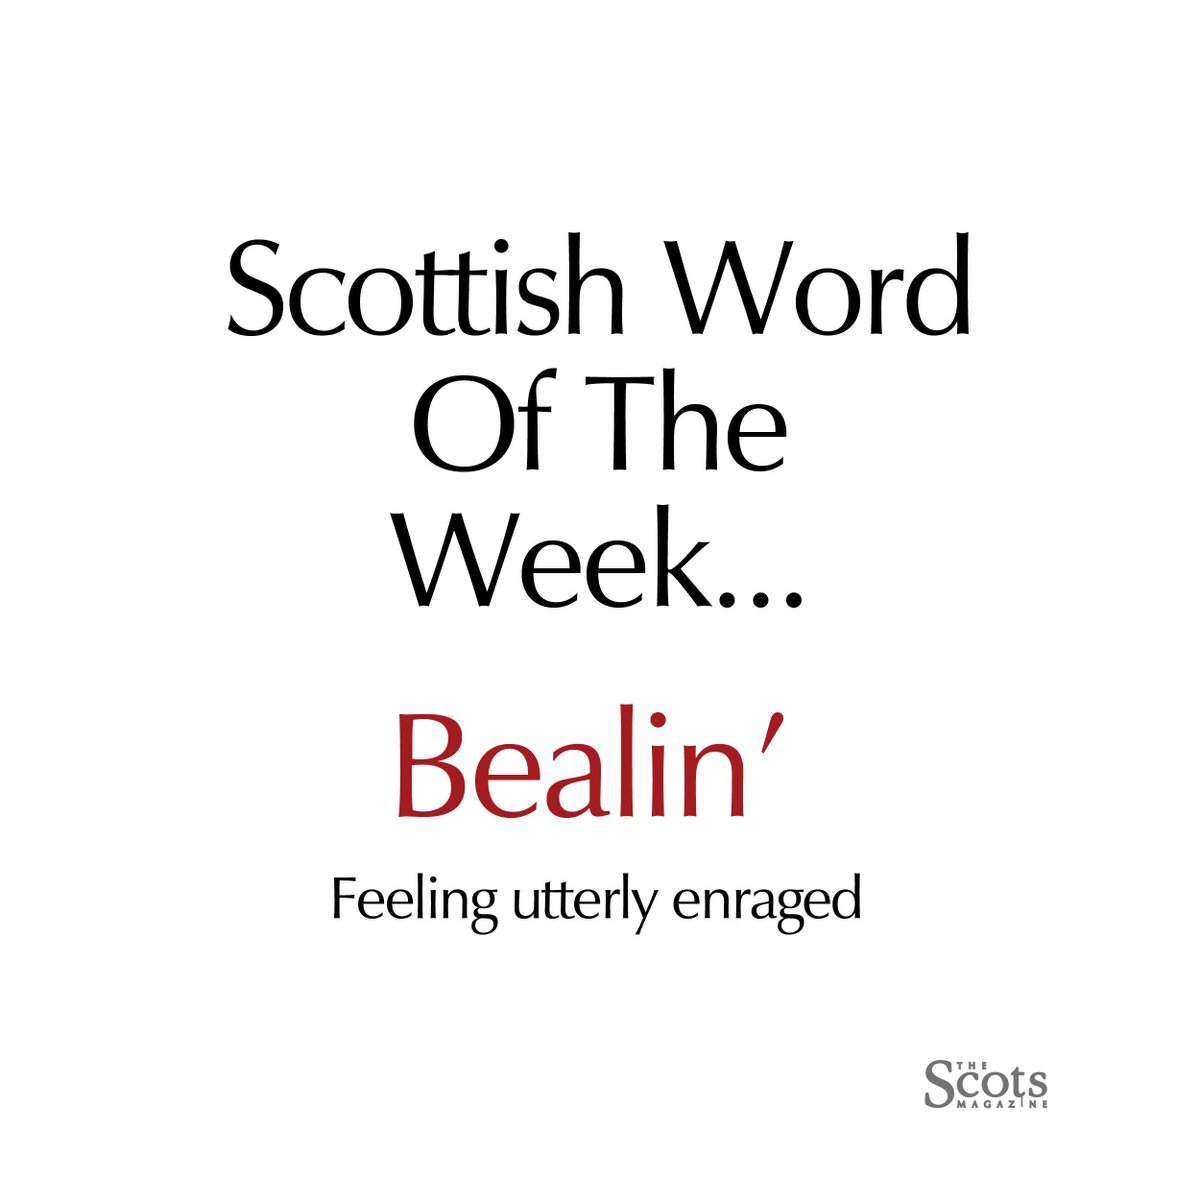 #Scottishwordoftheweek is bealin'. If you're bealin', you're furious! This can also be spelled as beelin'. Example sentence: 'Cannae believe I missed it. I'm bealin'!'